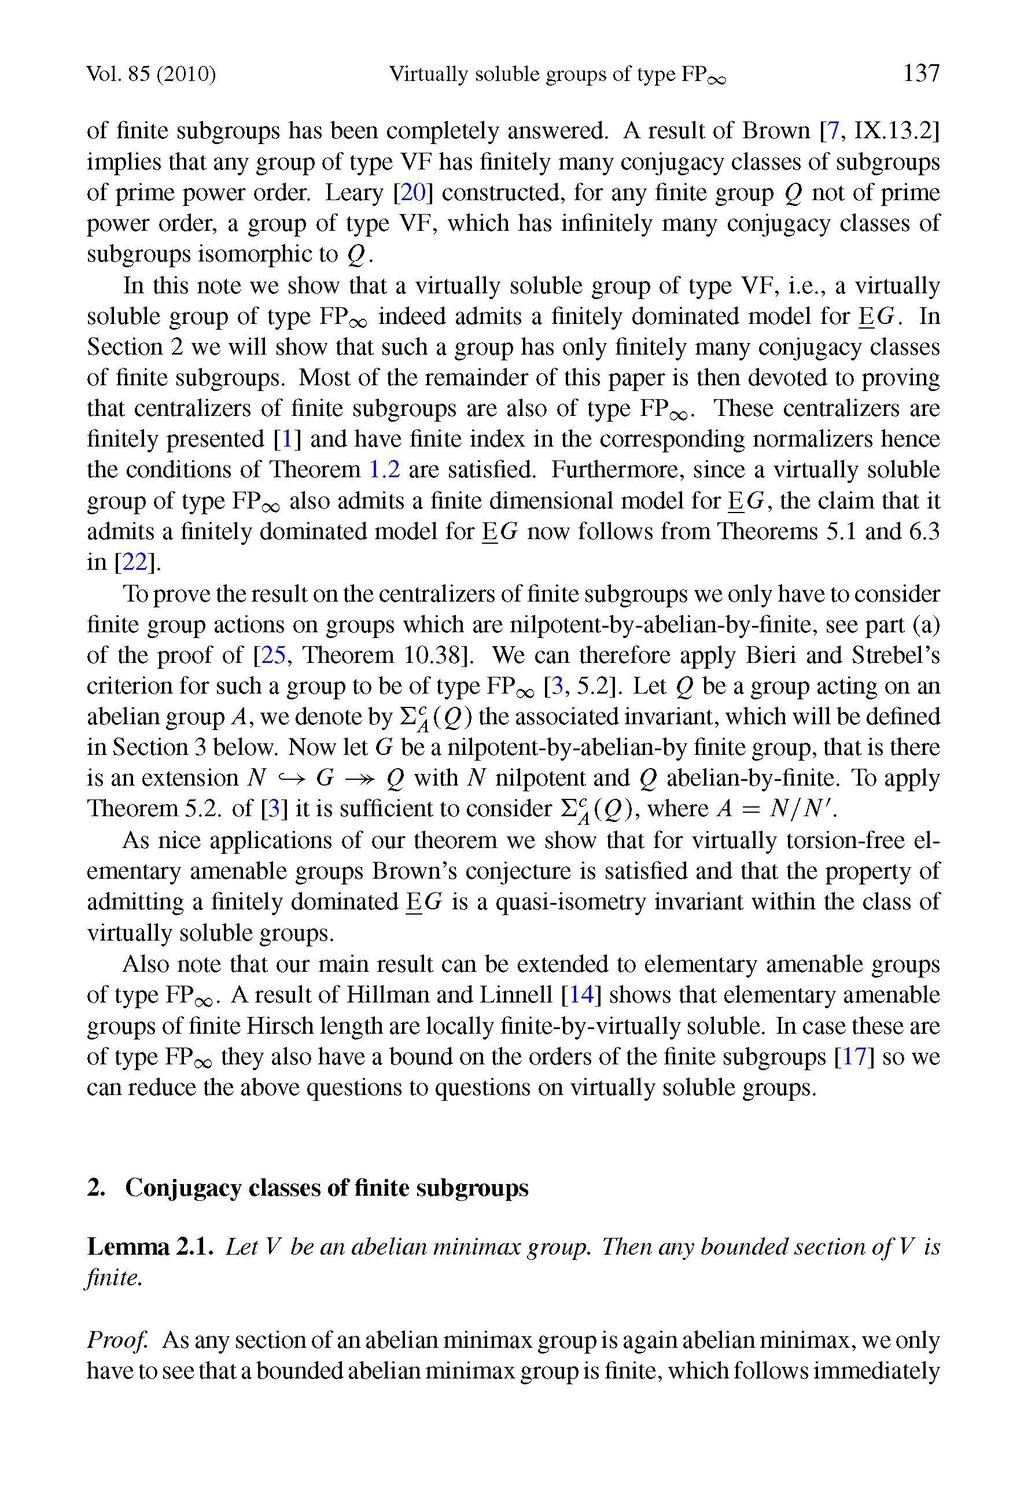 Vol. 85 2010) Virtually soluble groups of type FP1 137 of finite subgroups has been completely answered. A result of Brown [7, IX.13.2] implies that any group of type VF has finitely many conjugacy classes of subgroups of prime power order.